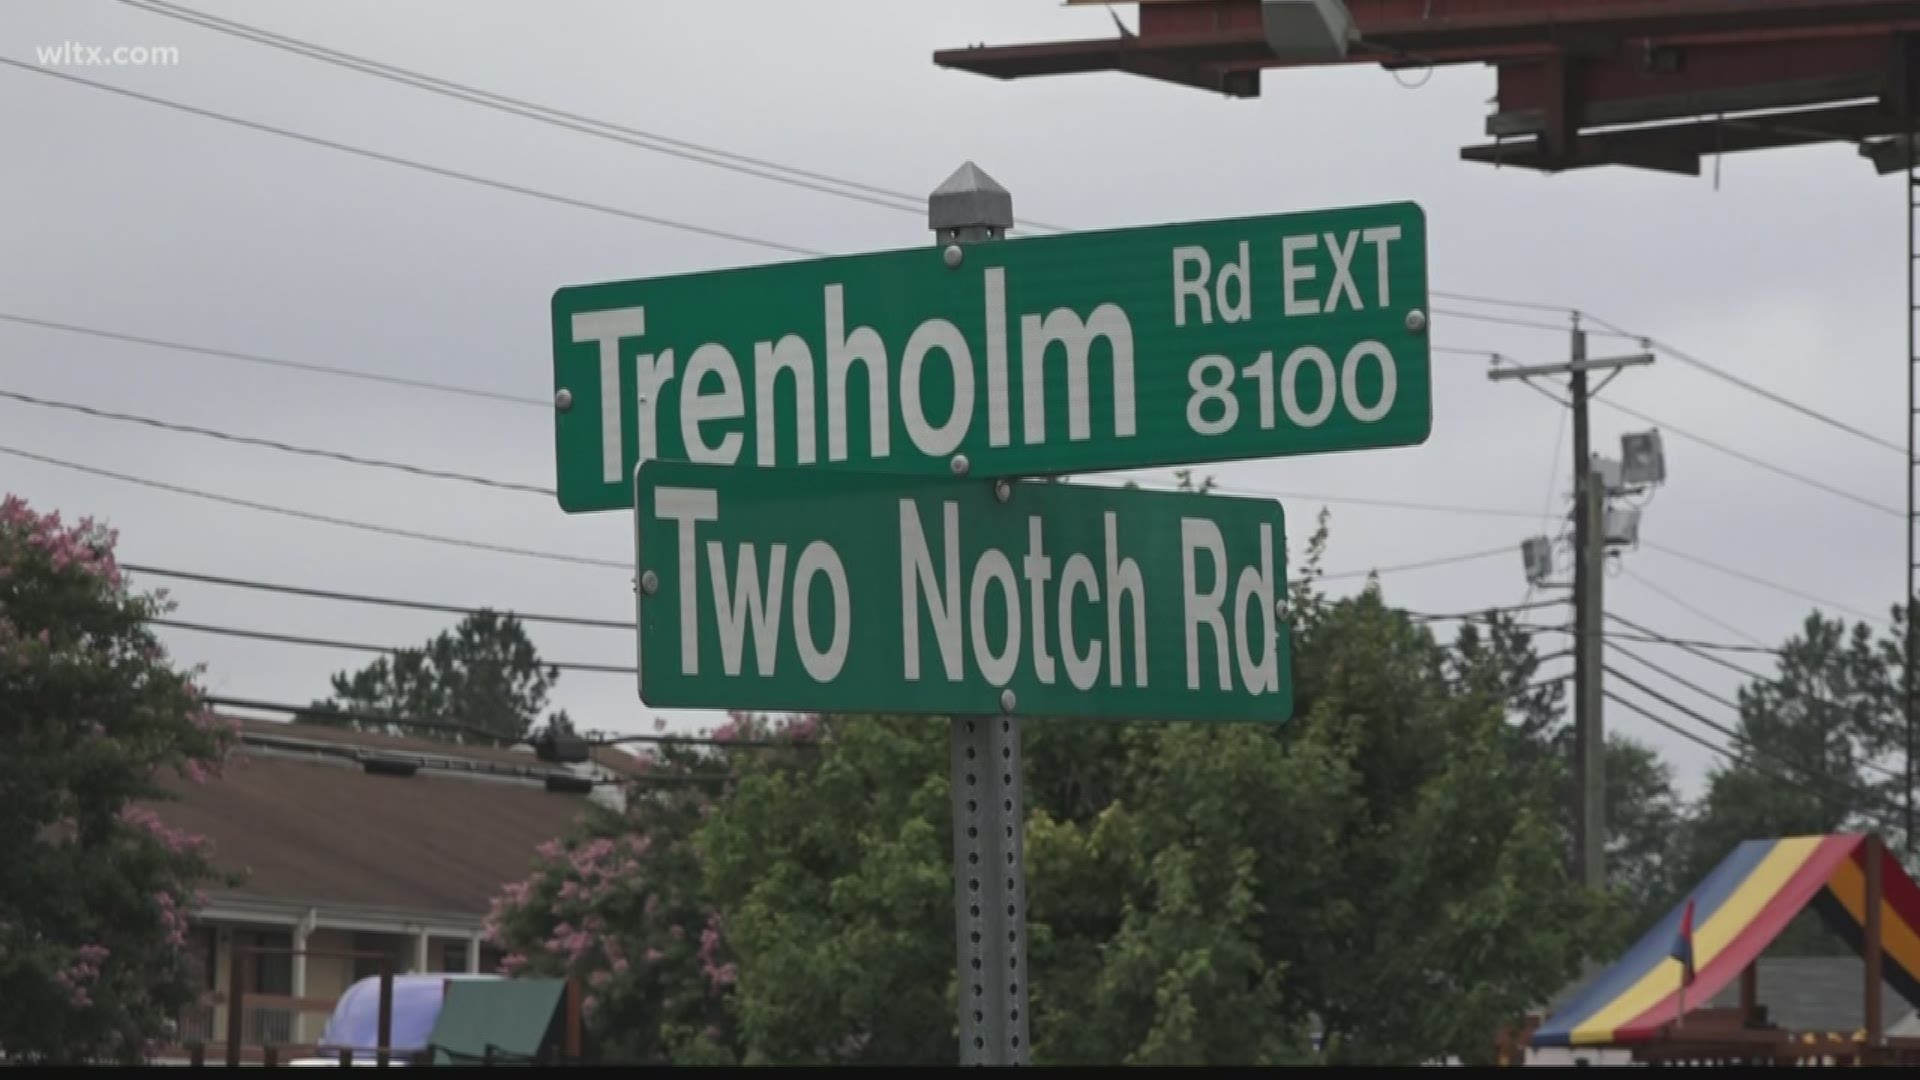 Improvements would be along 4-mile stretch between Trenholm and Valhalla roads